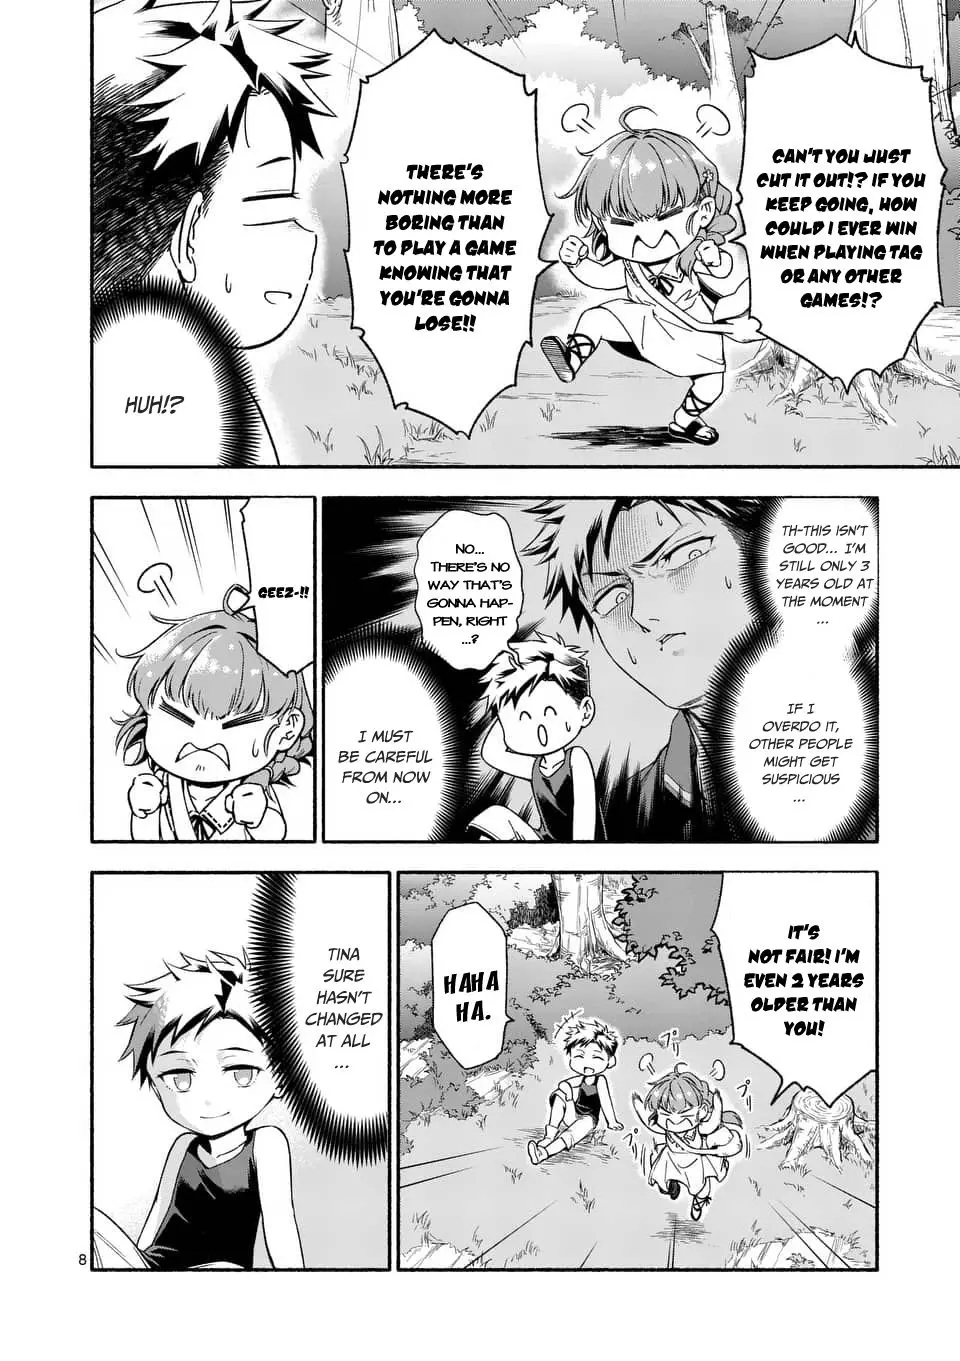 After Being Reborn, I Became the Strongest to Save Everyone - 2 page 9